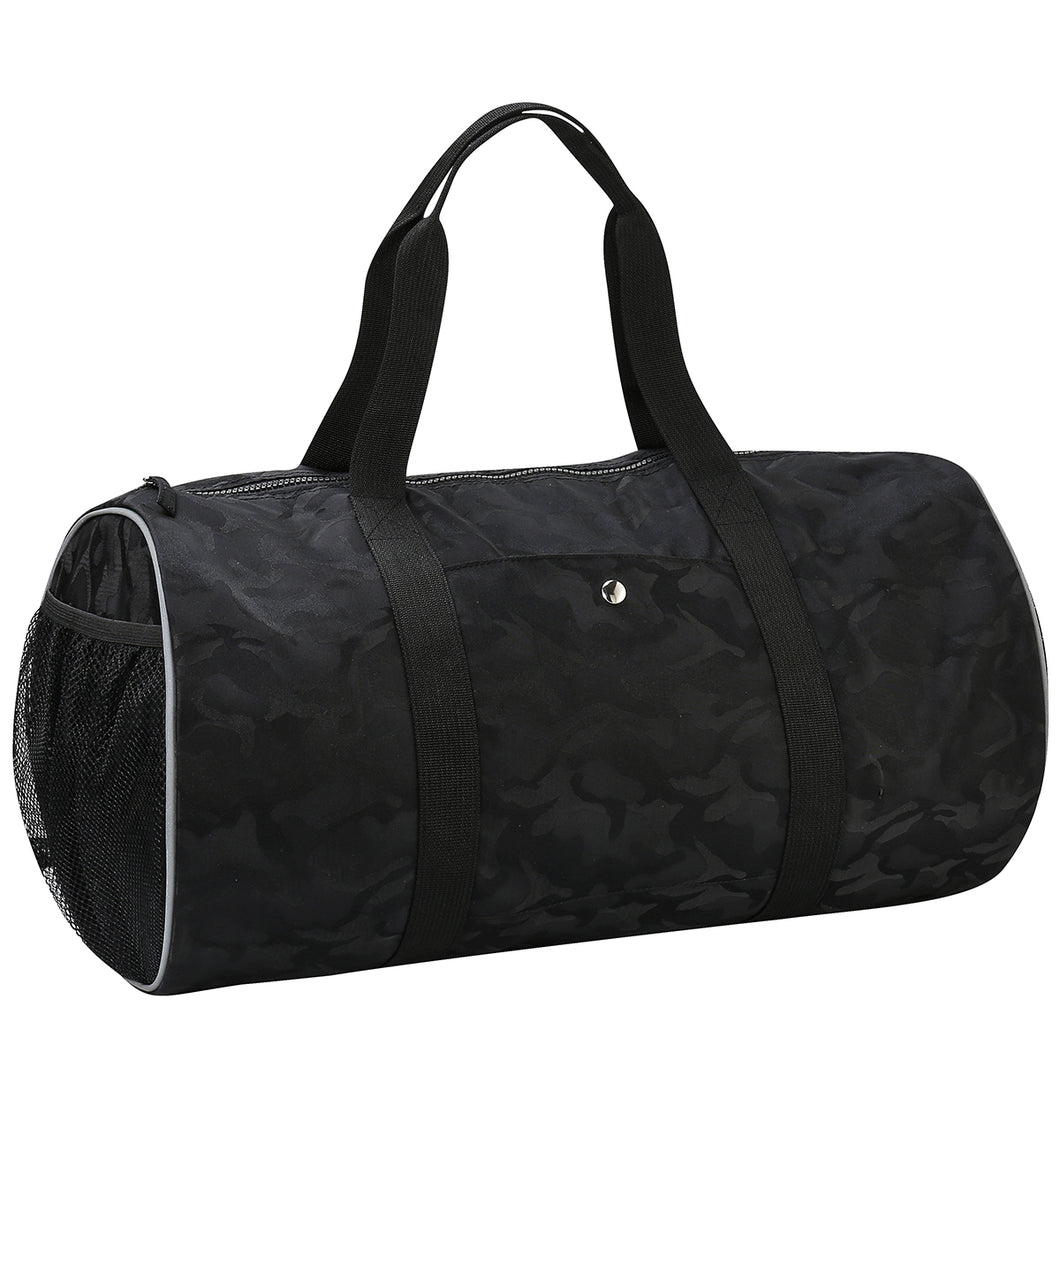 RALAWISE EVERYDAY ROLL BAG - CAMOUFLAGE